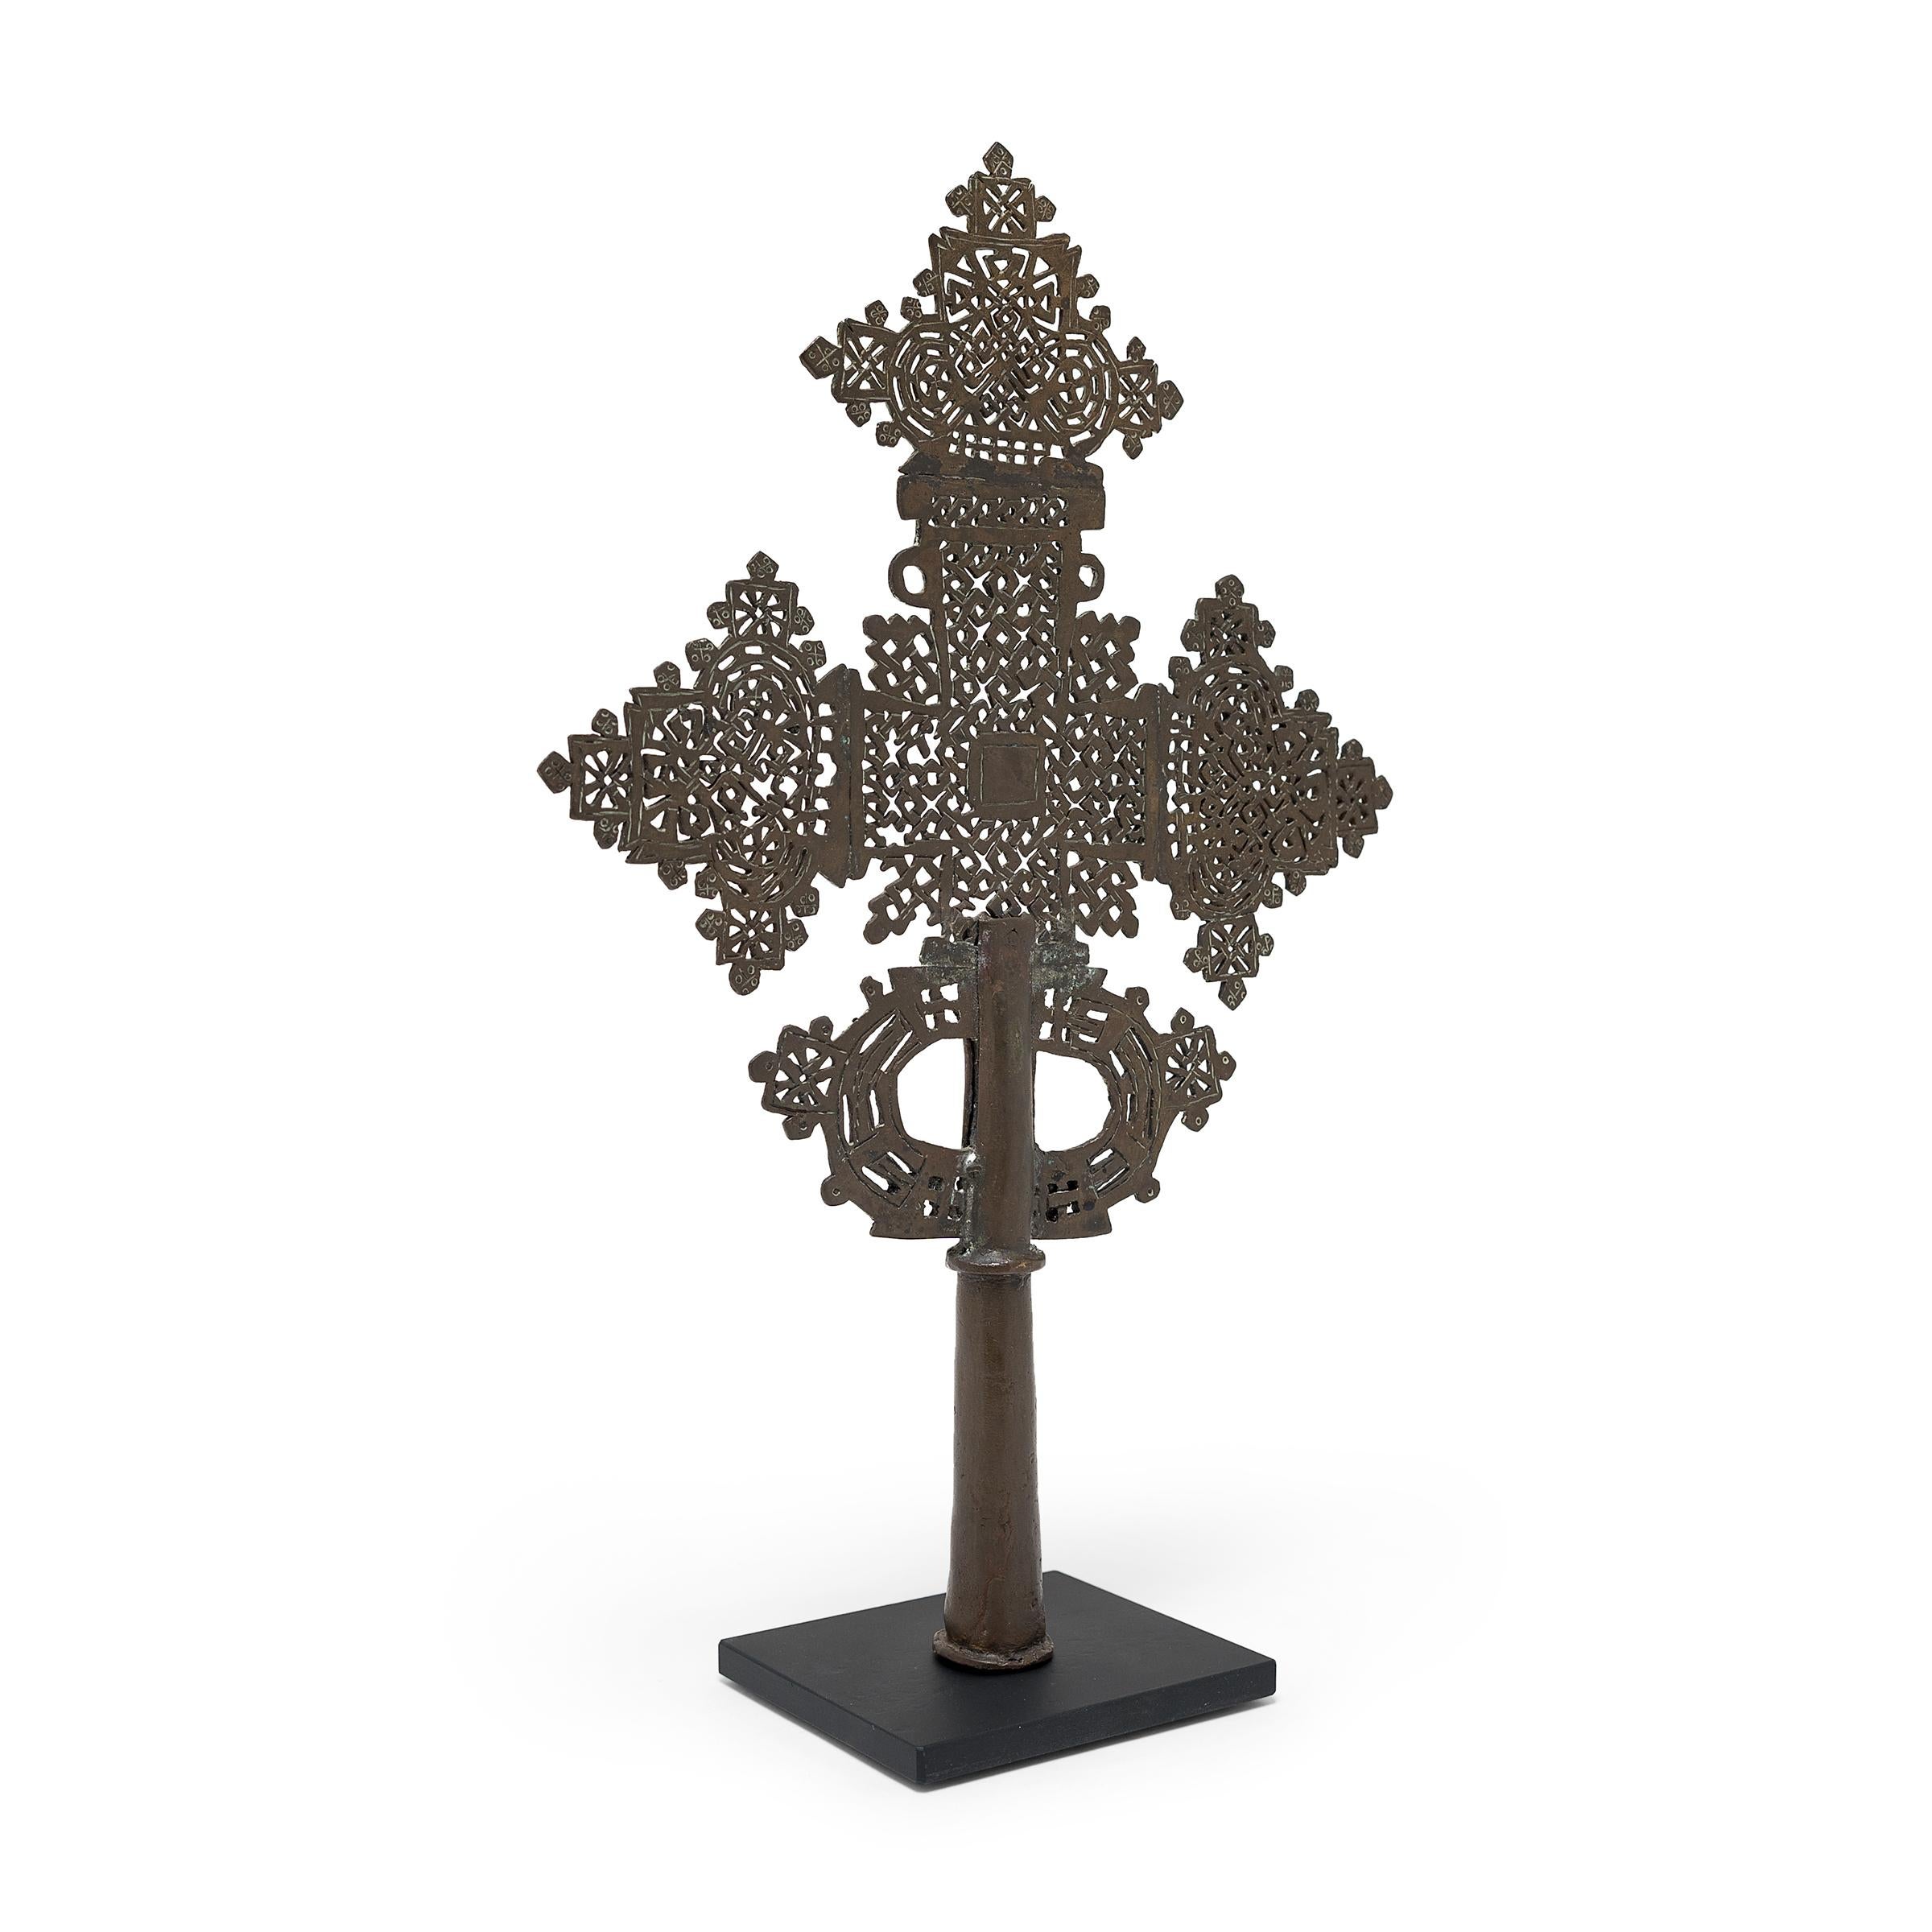 This intricate Ethiopian processional cross exemplifies a style unique to the region's Coptic subset of the Christian faith. The exquisitely detailed perforated form is centered on a hollowed base that could be either fitted upon a staff for